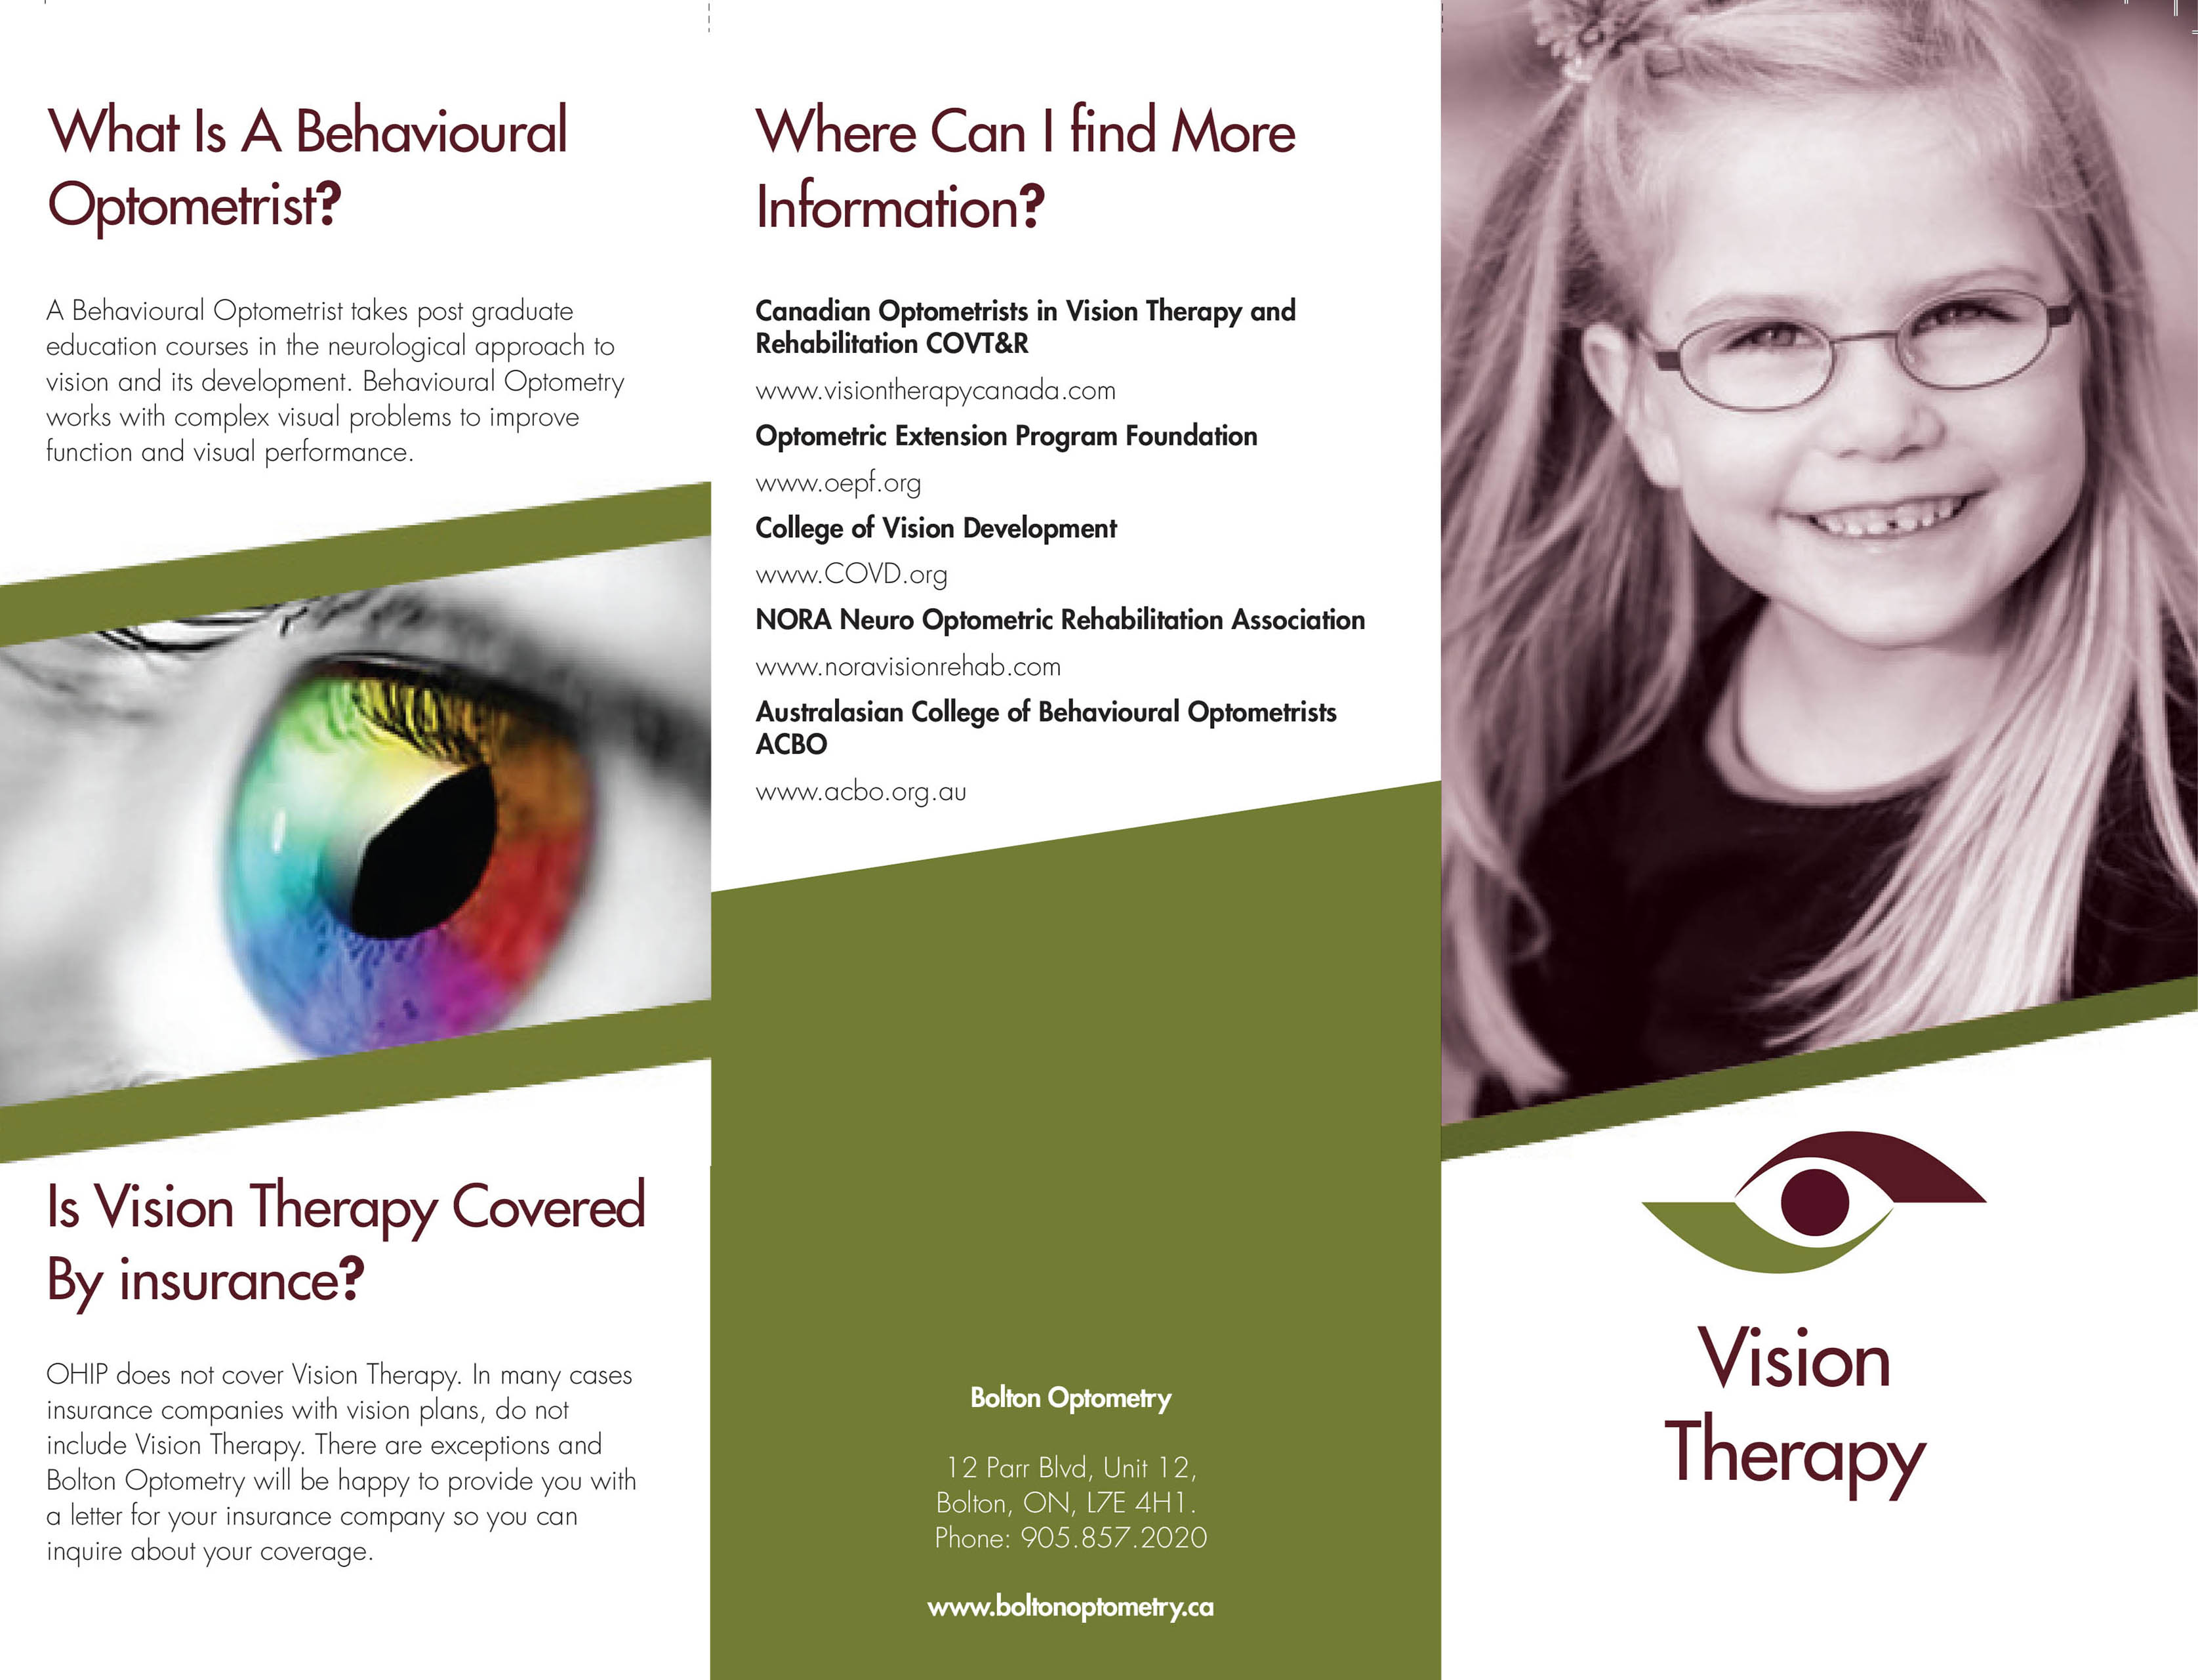 TriFold VisionTherapy Leaflet